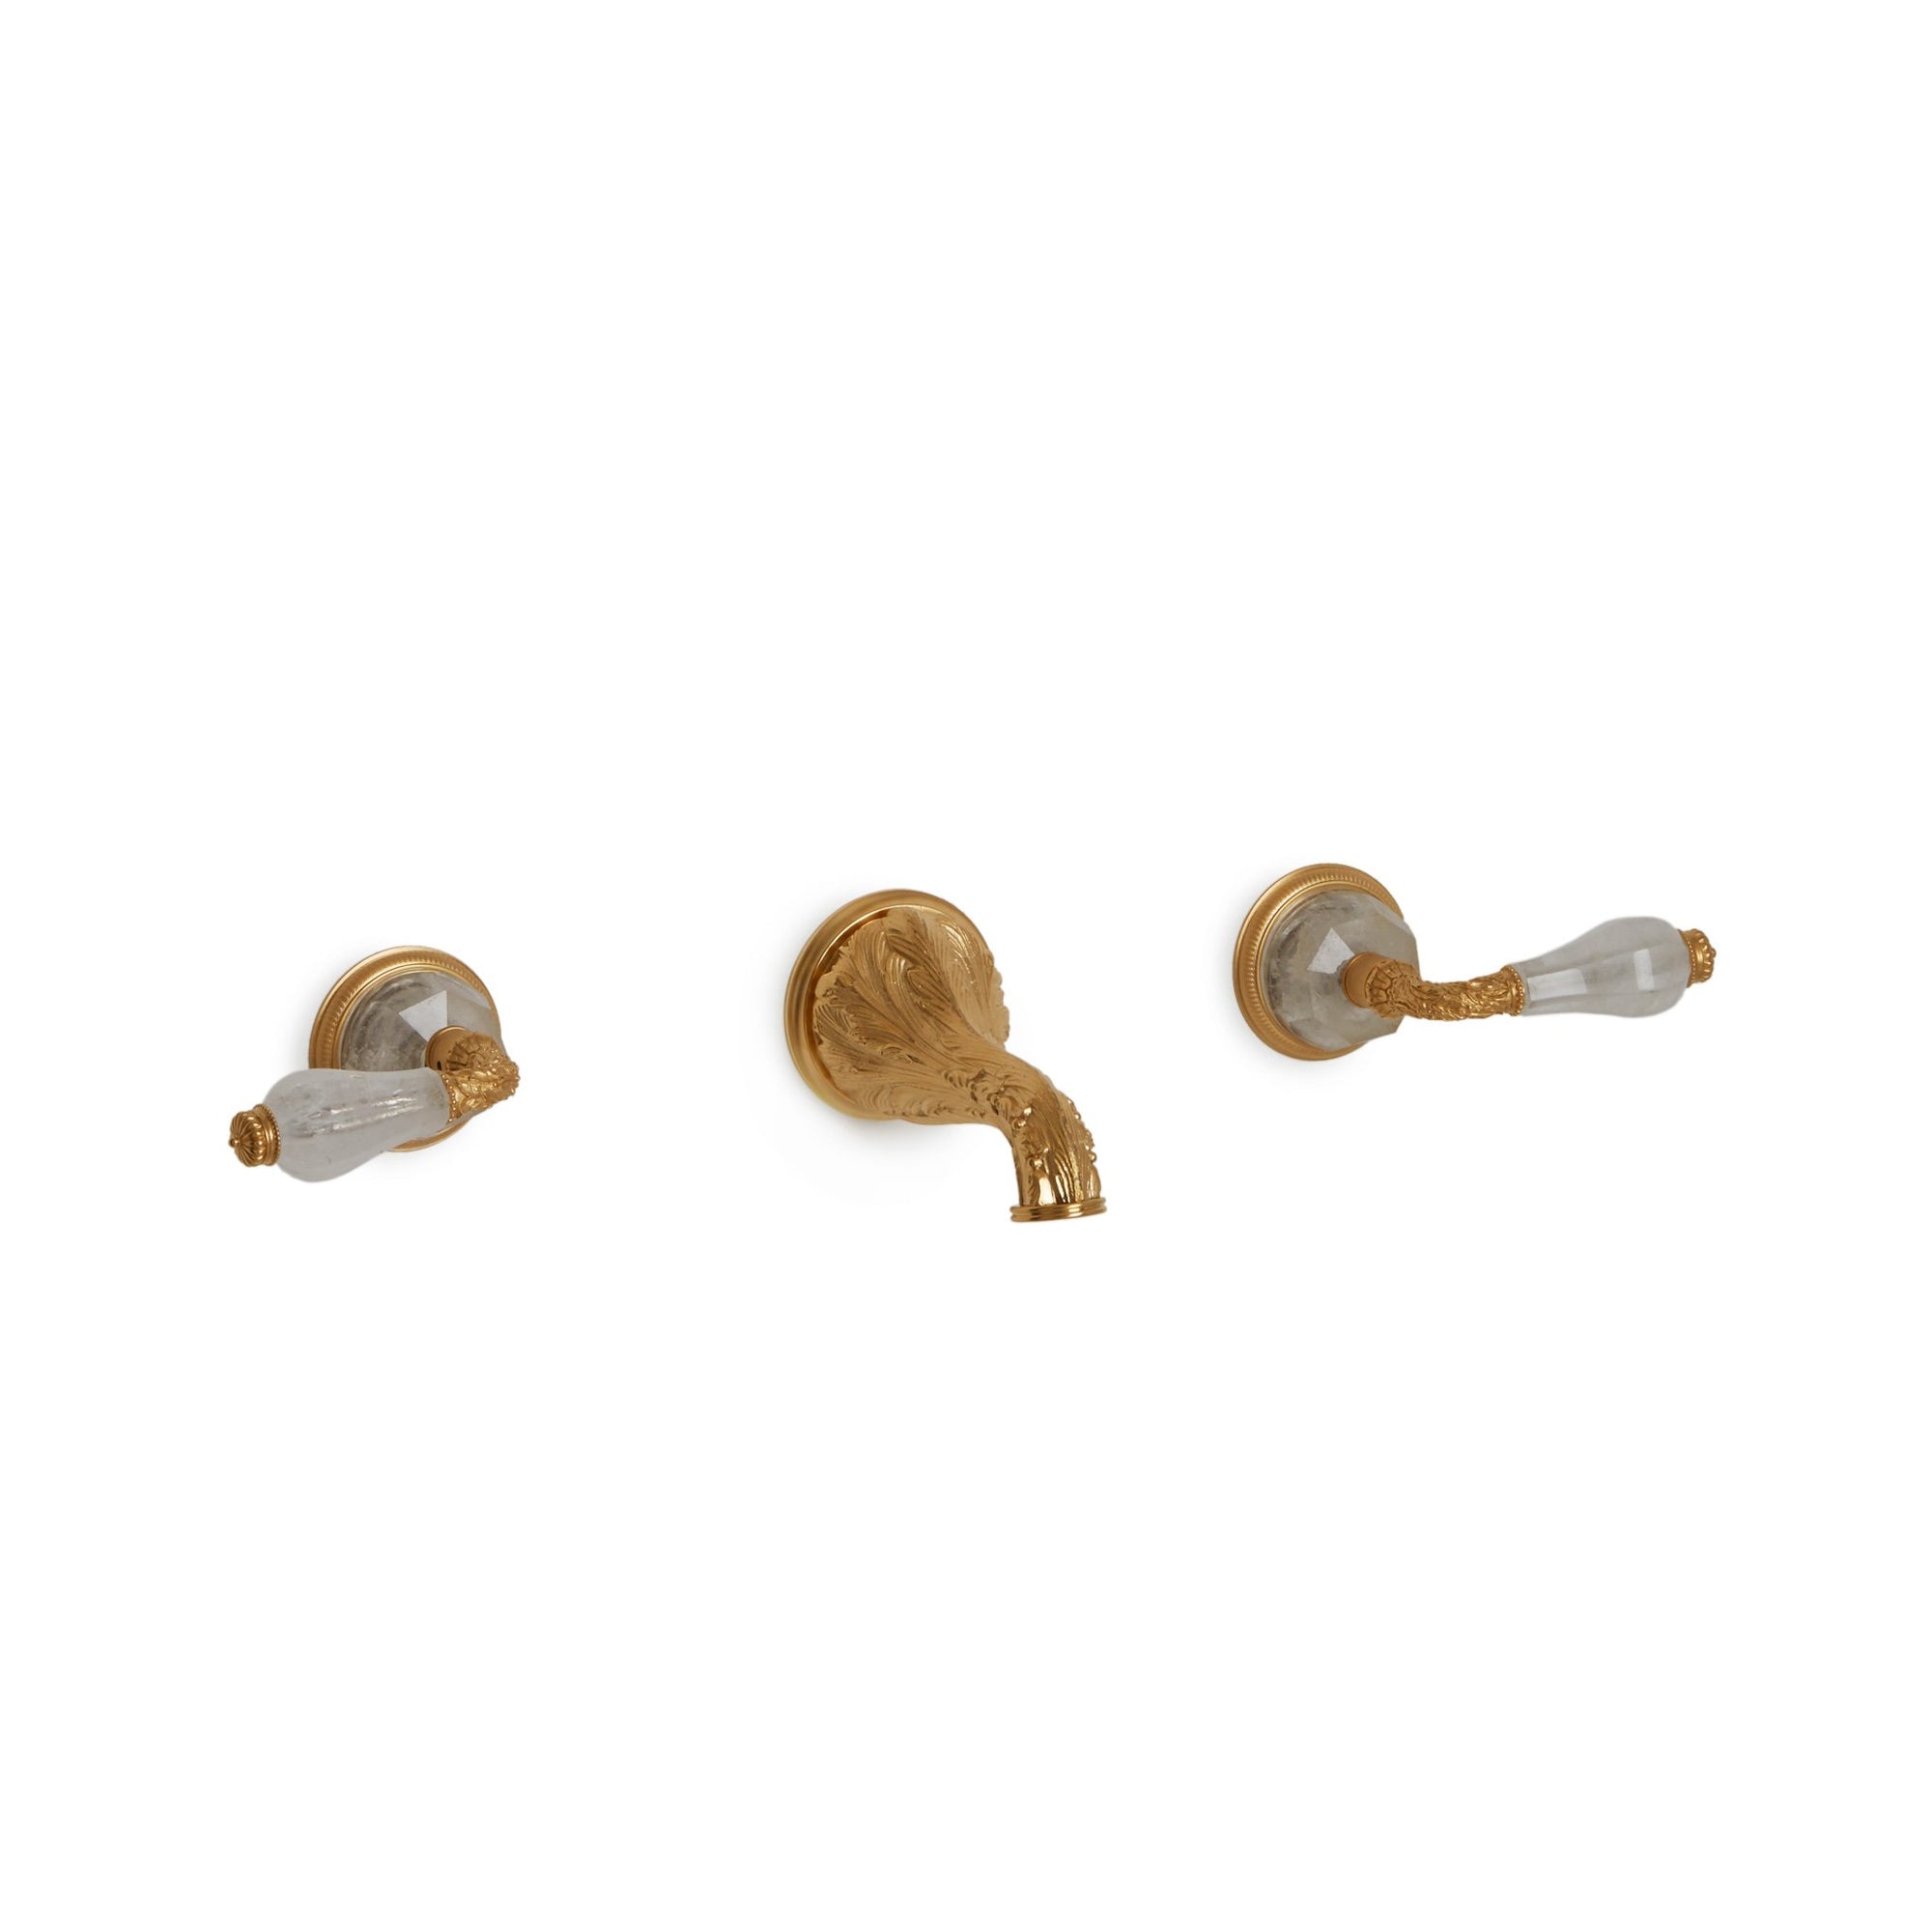 1030WBS819-RKCR-GP Sherle Wagner International Semiprecious Knurled Knob Wall Mount Faucet Set in Gold Plate metal finish with Rock Crystal inserts